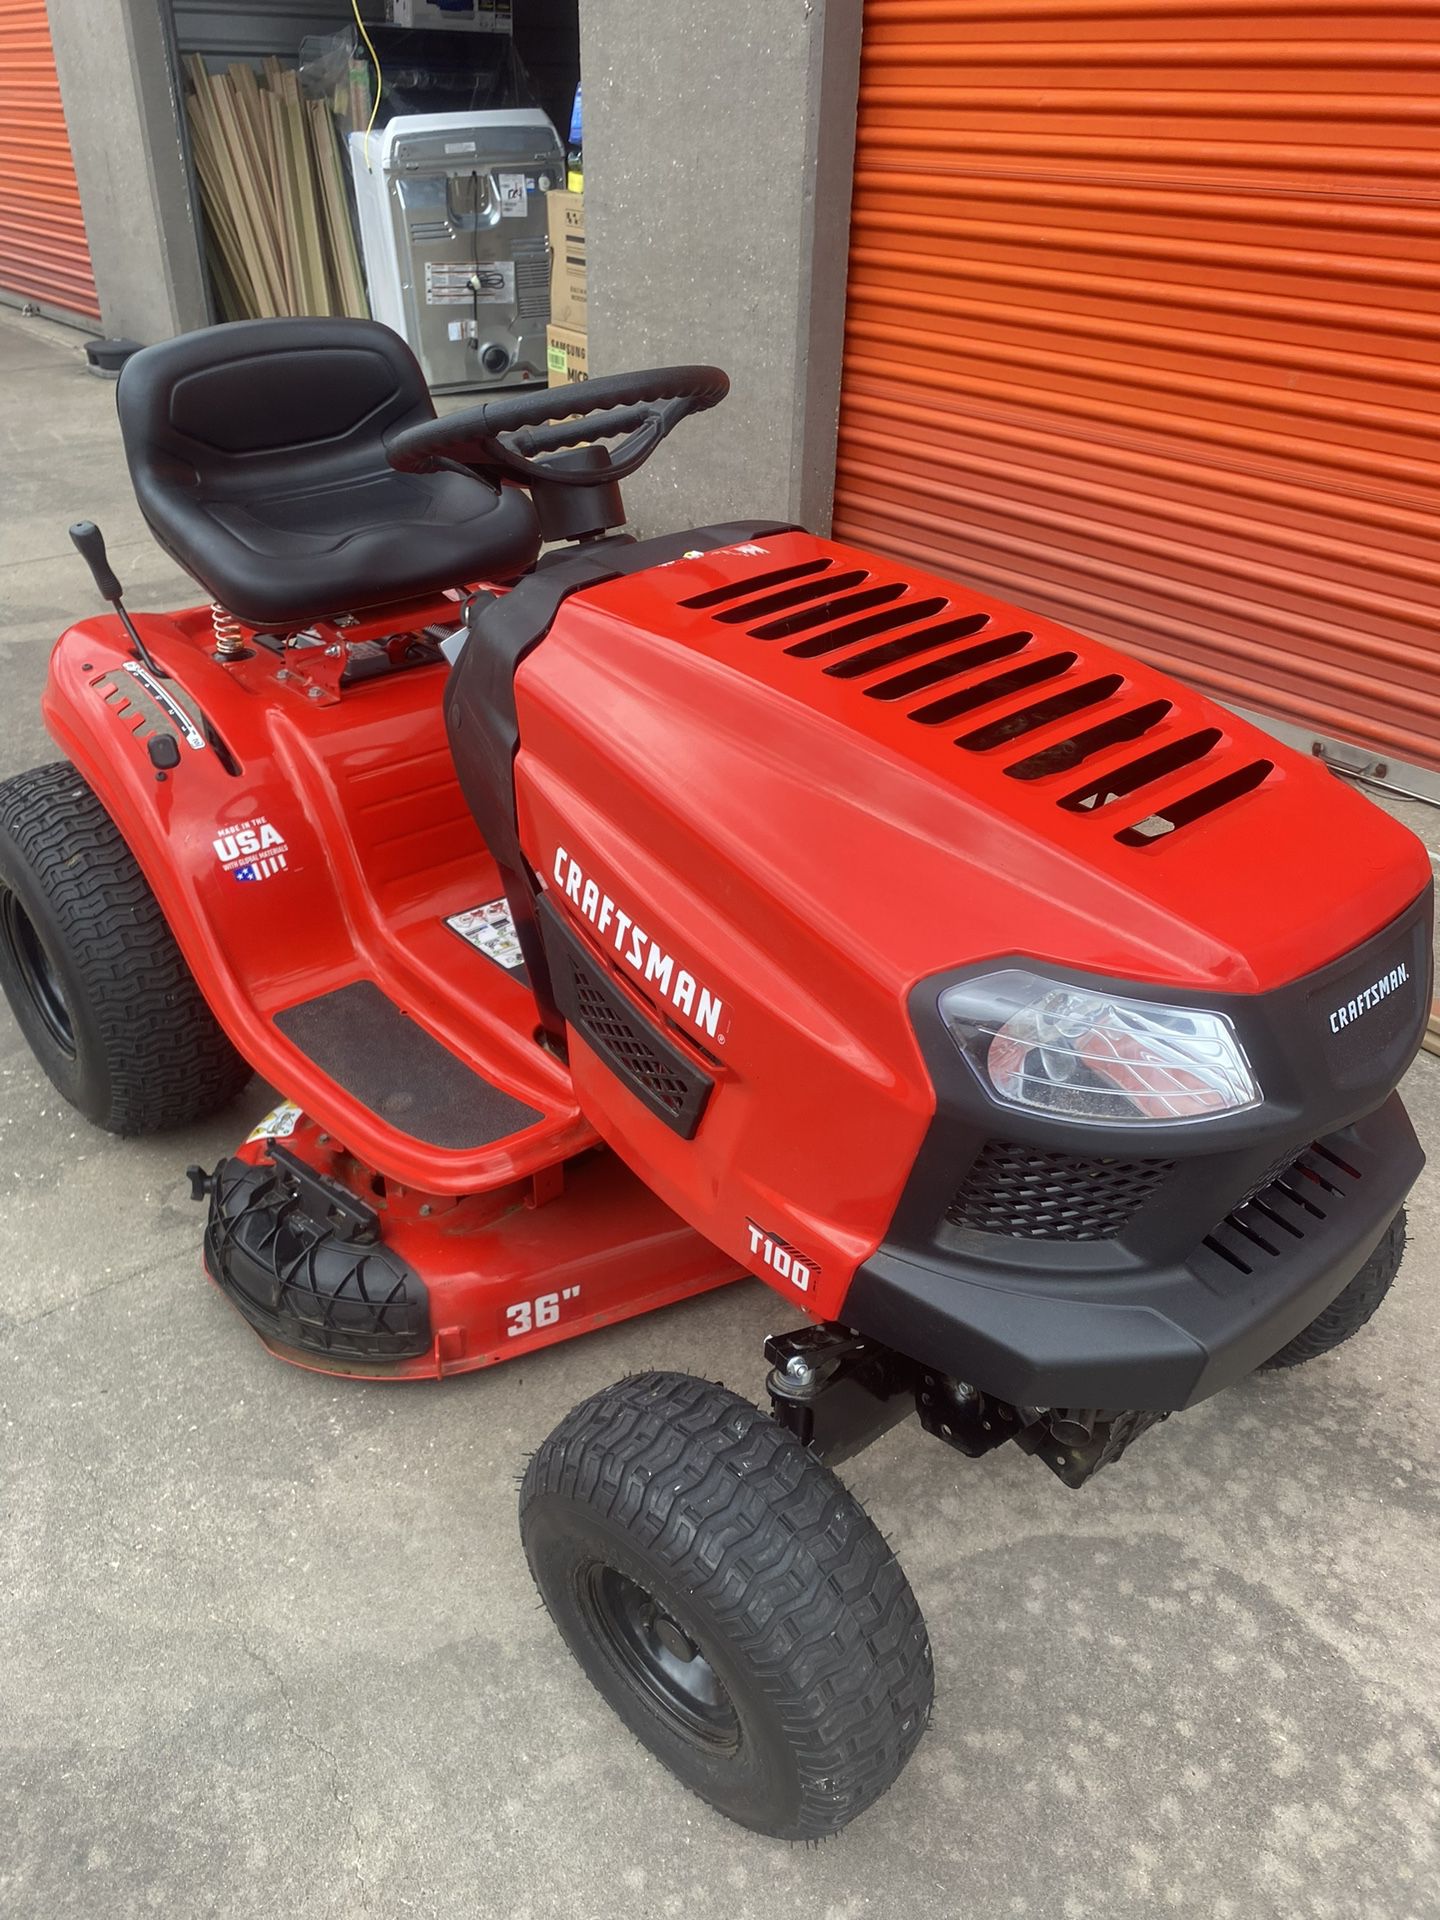 Needs Belt,,CRAFTSMAN T100 36-in 11.5-HP Gas Riding Lawn Mower $1375.00 !!!!!AFFIRMED!!!!!